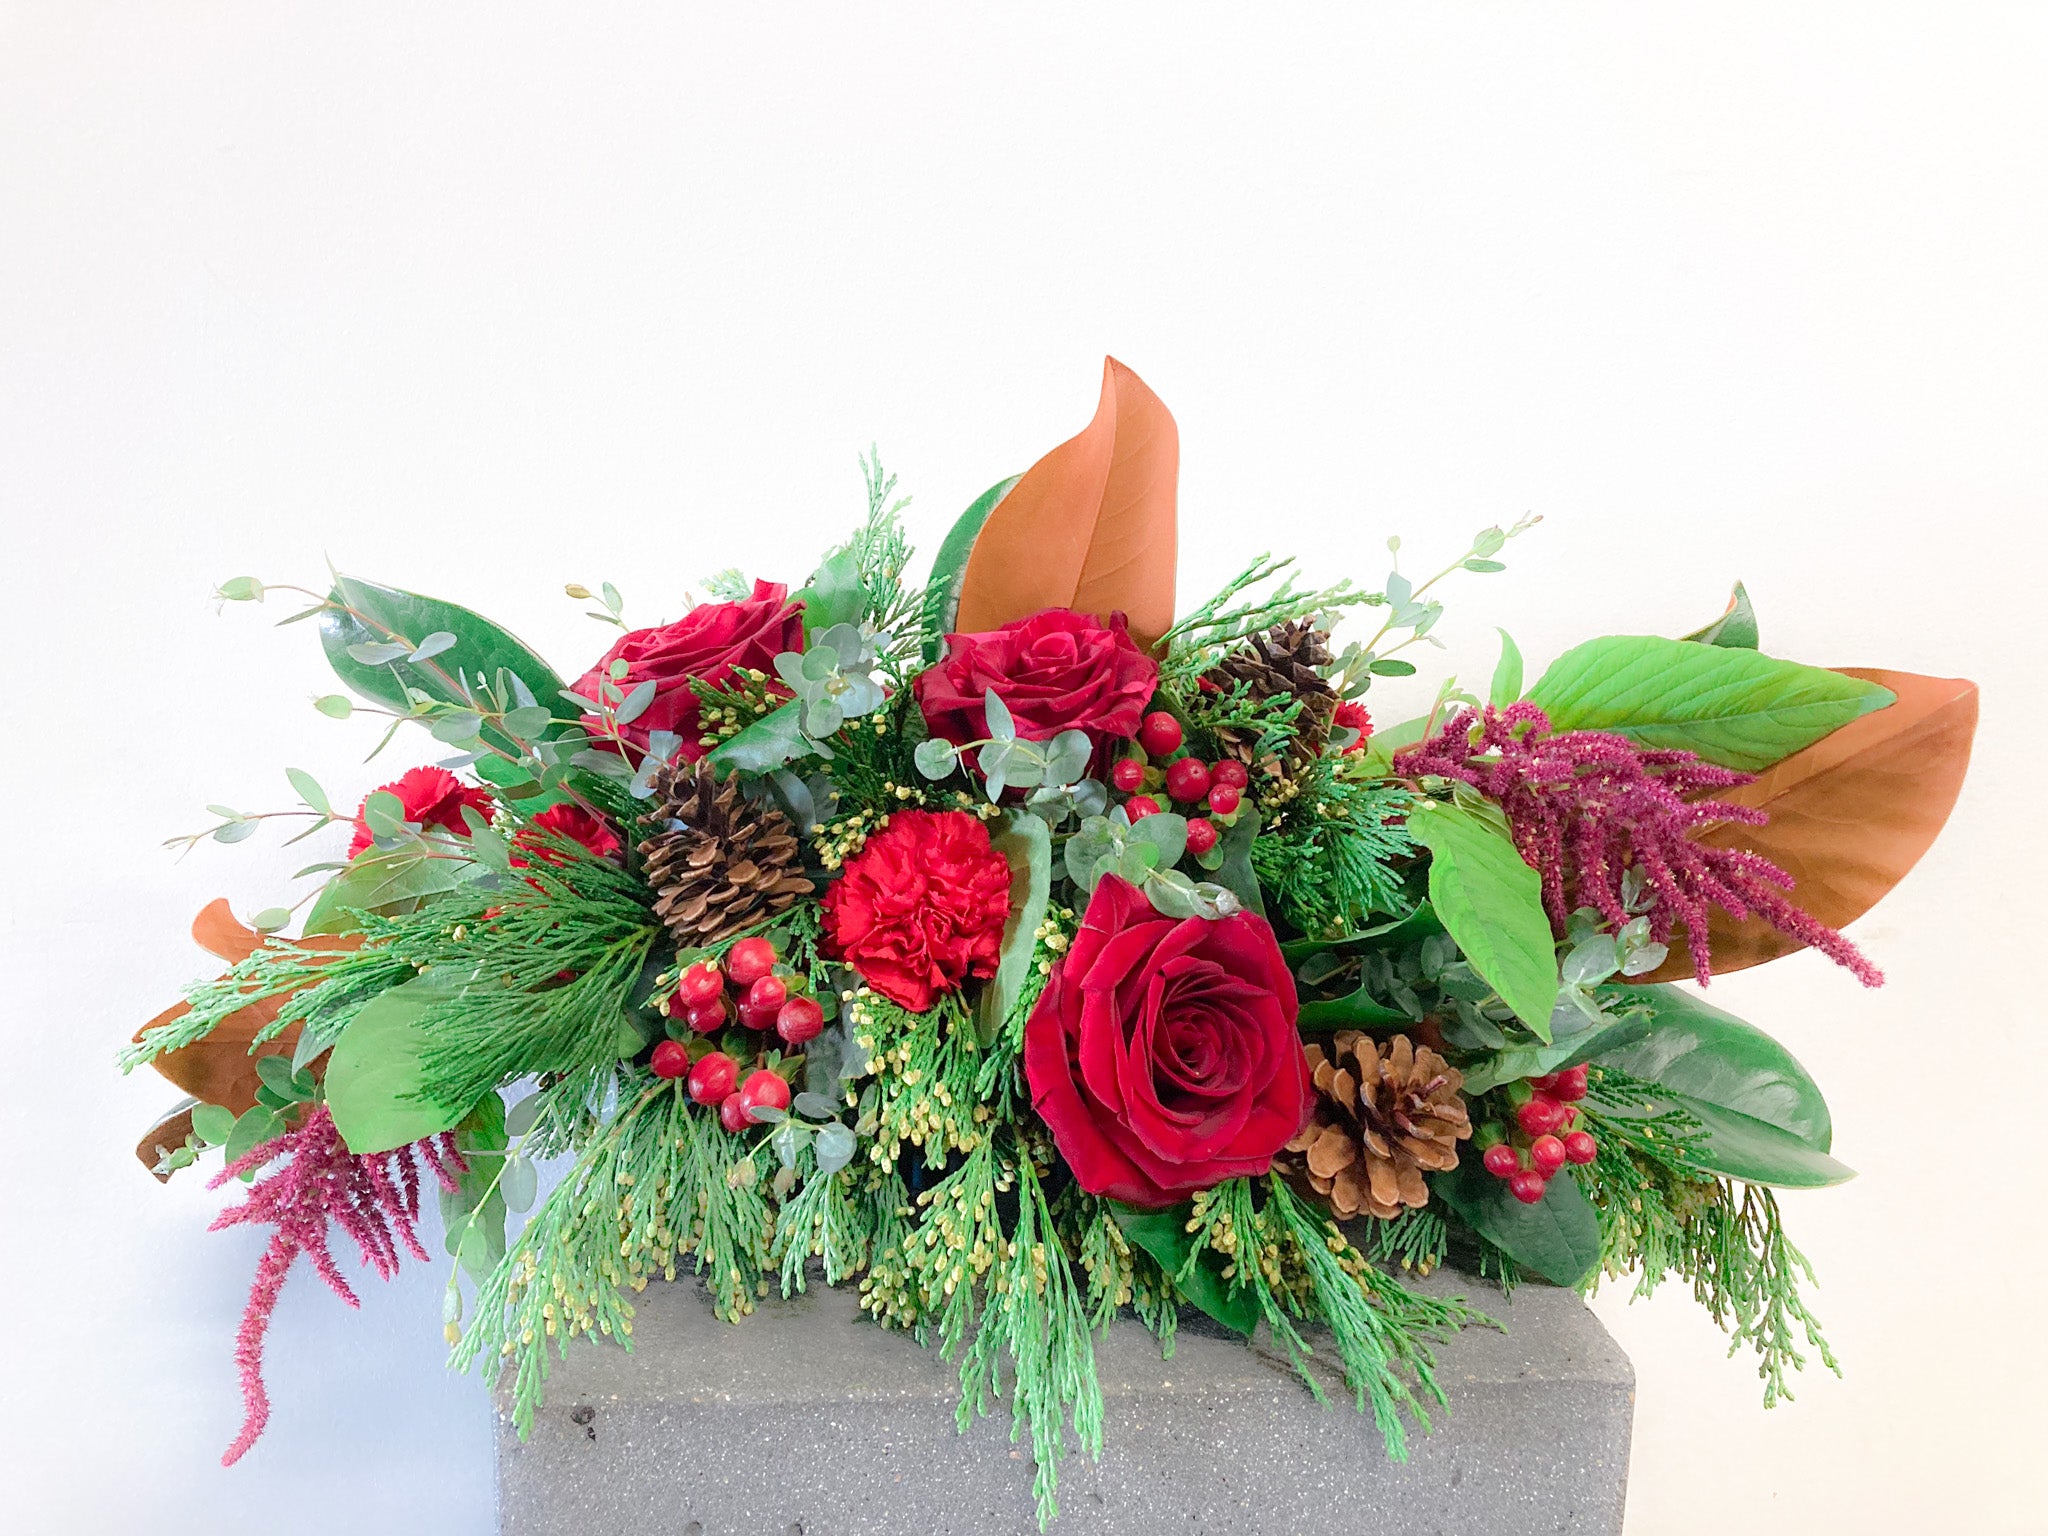 Home For The Holidays Centerpiece - Winter Seasonal Florist Design in Red Tones + Christmas Greens